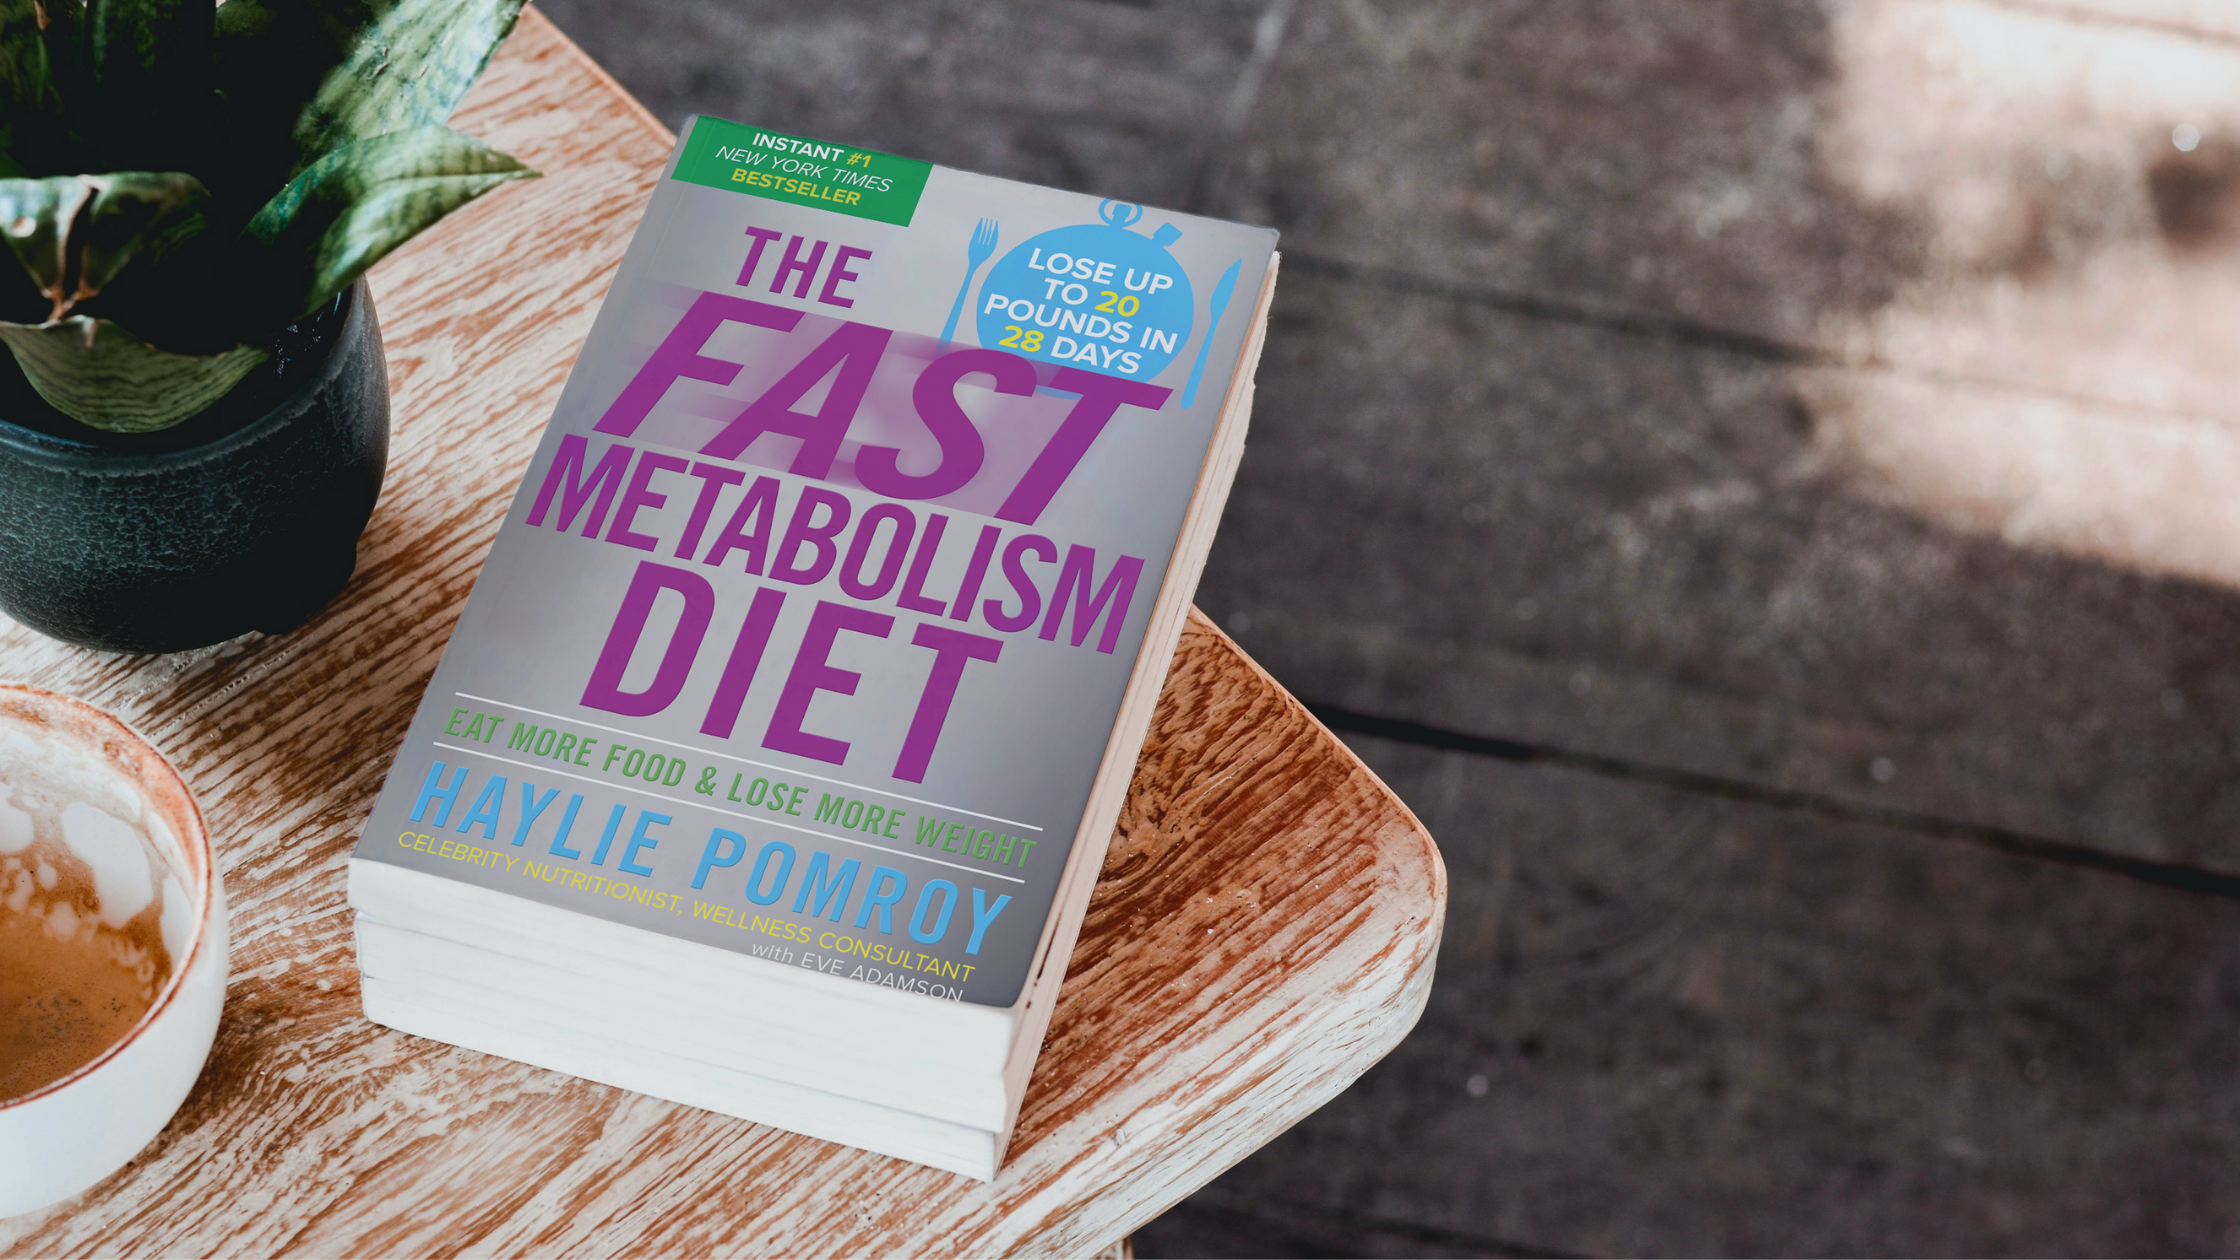 The Fast Metabolism Diet book on desk